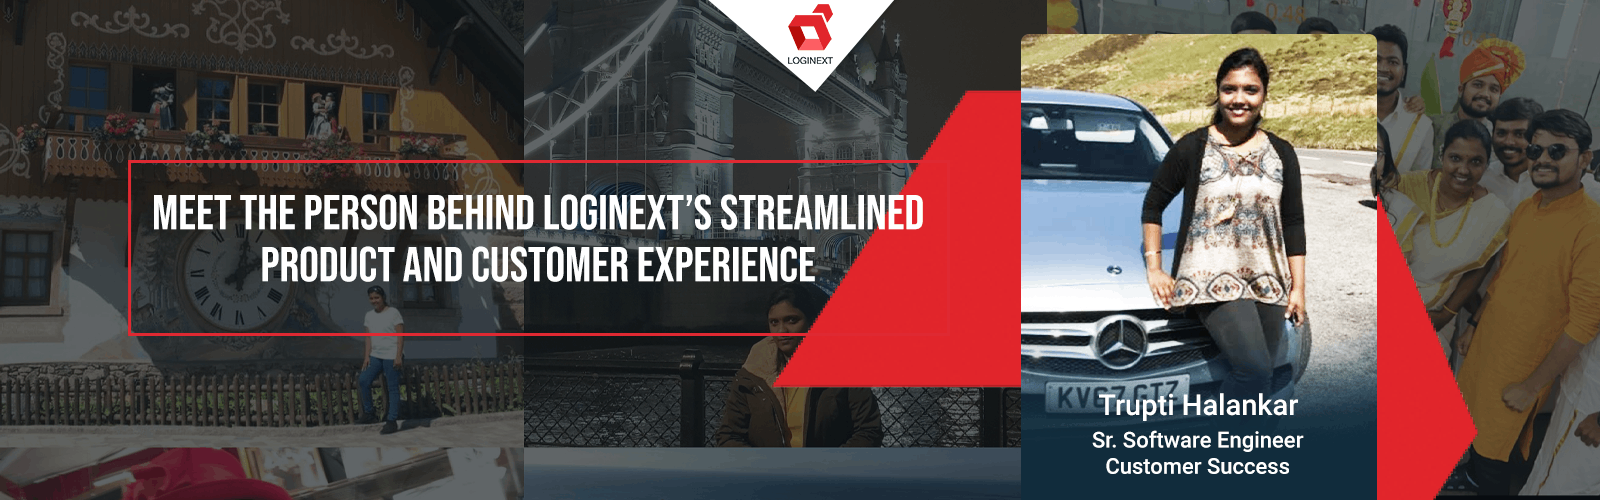 Meet The Person Behind LogiNext’s Streamlined Product and Customer Experience, Trupti Halankar